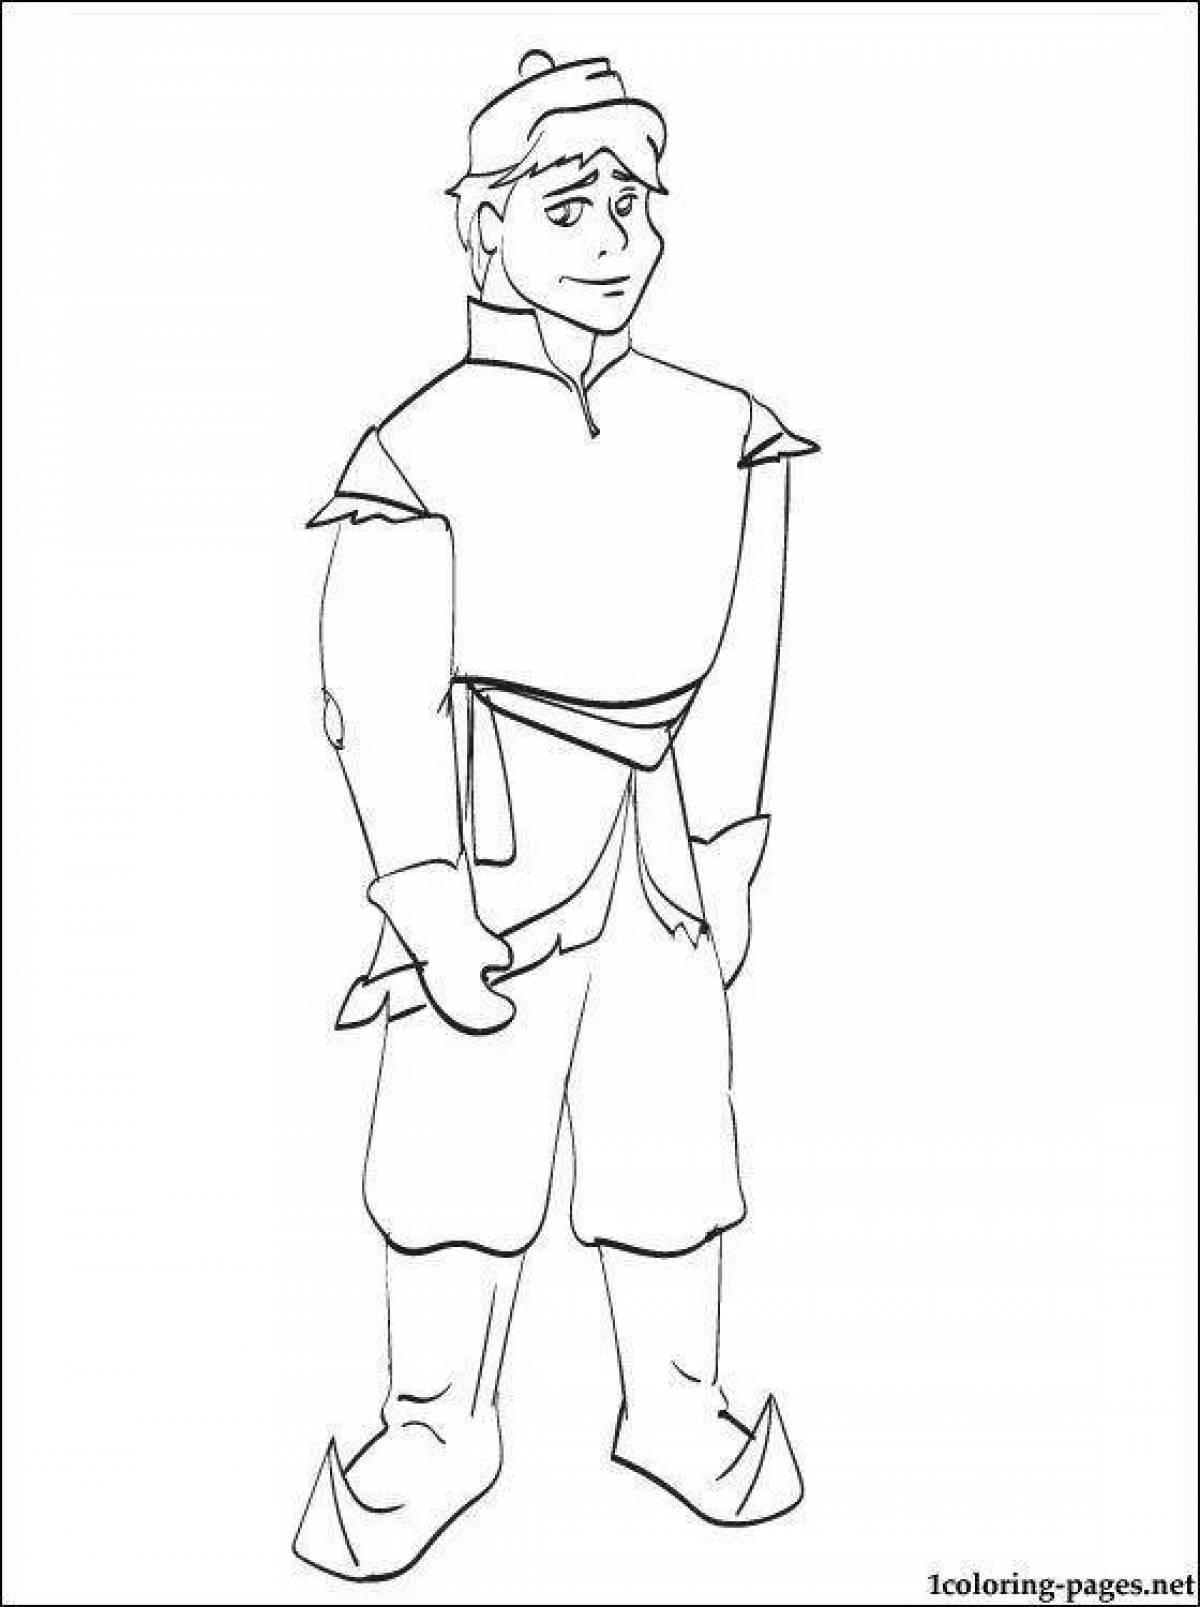 Christoph's animated coloring page